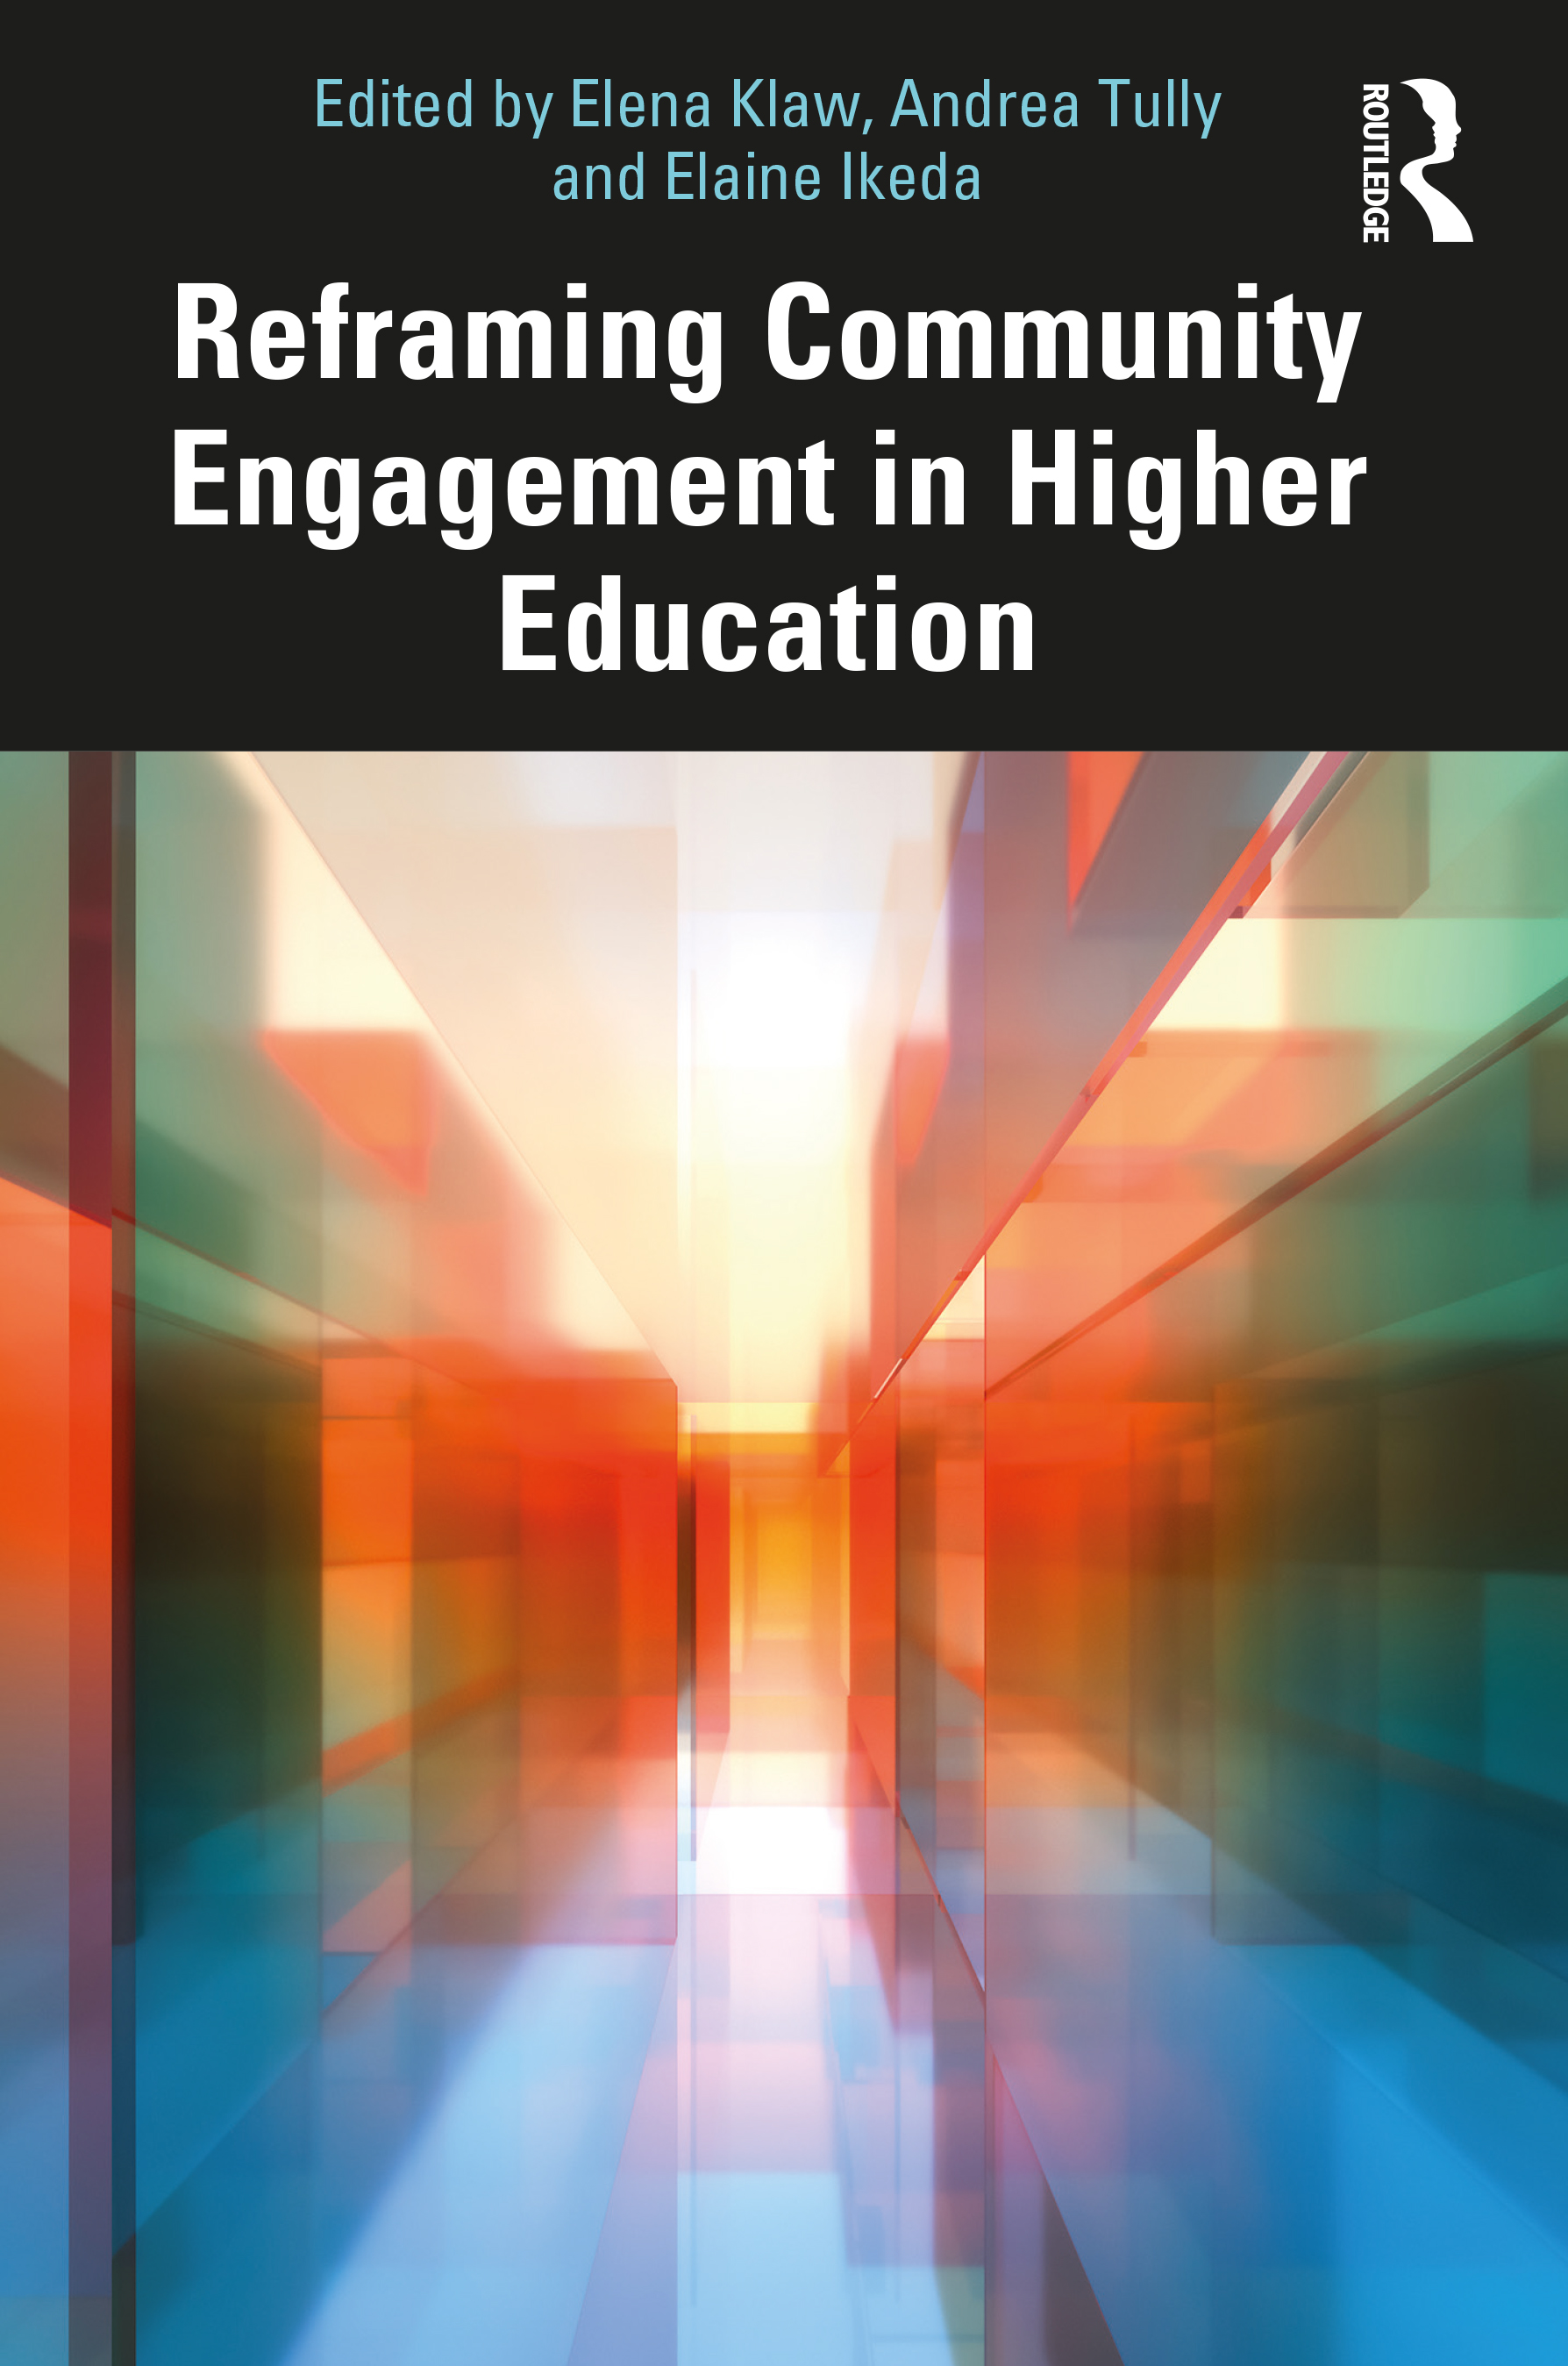 Book Cover for "Reframing Community Engagement in Higher Education"